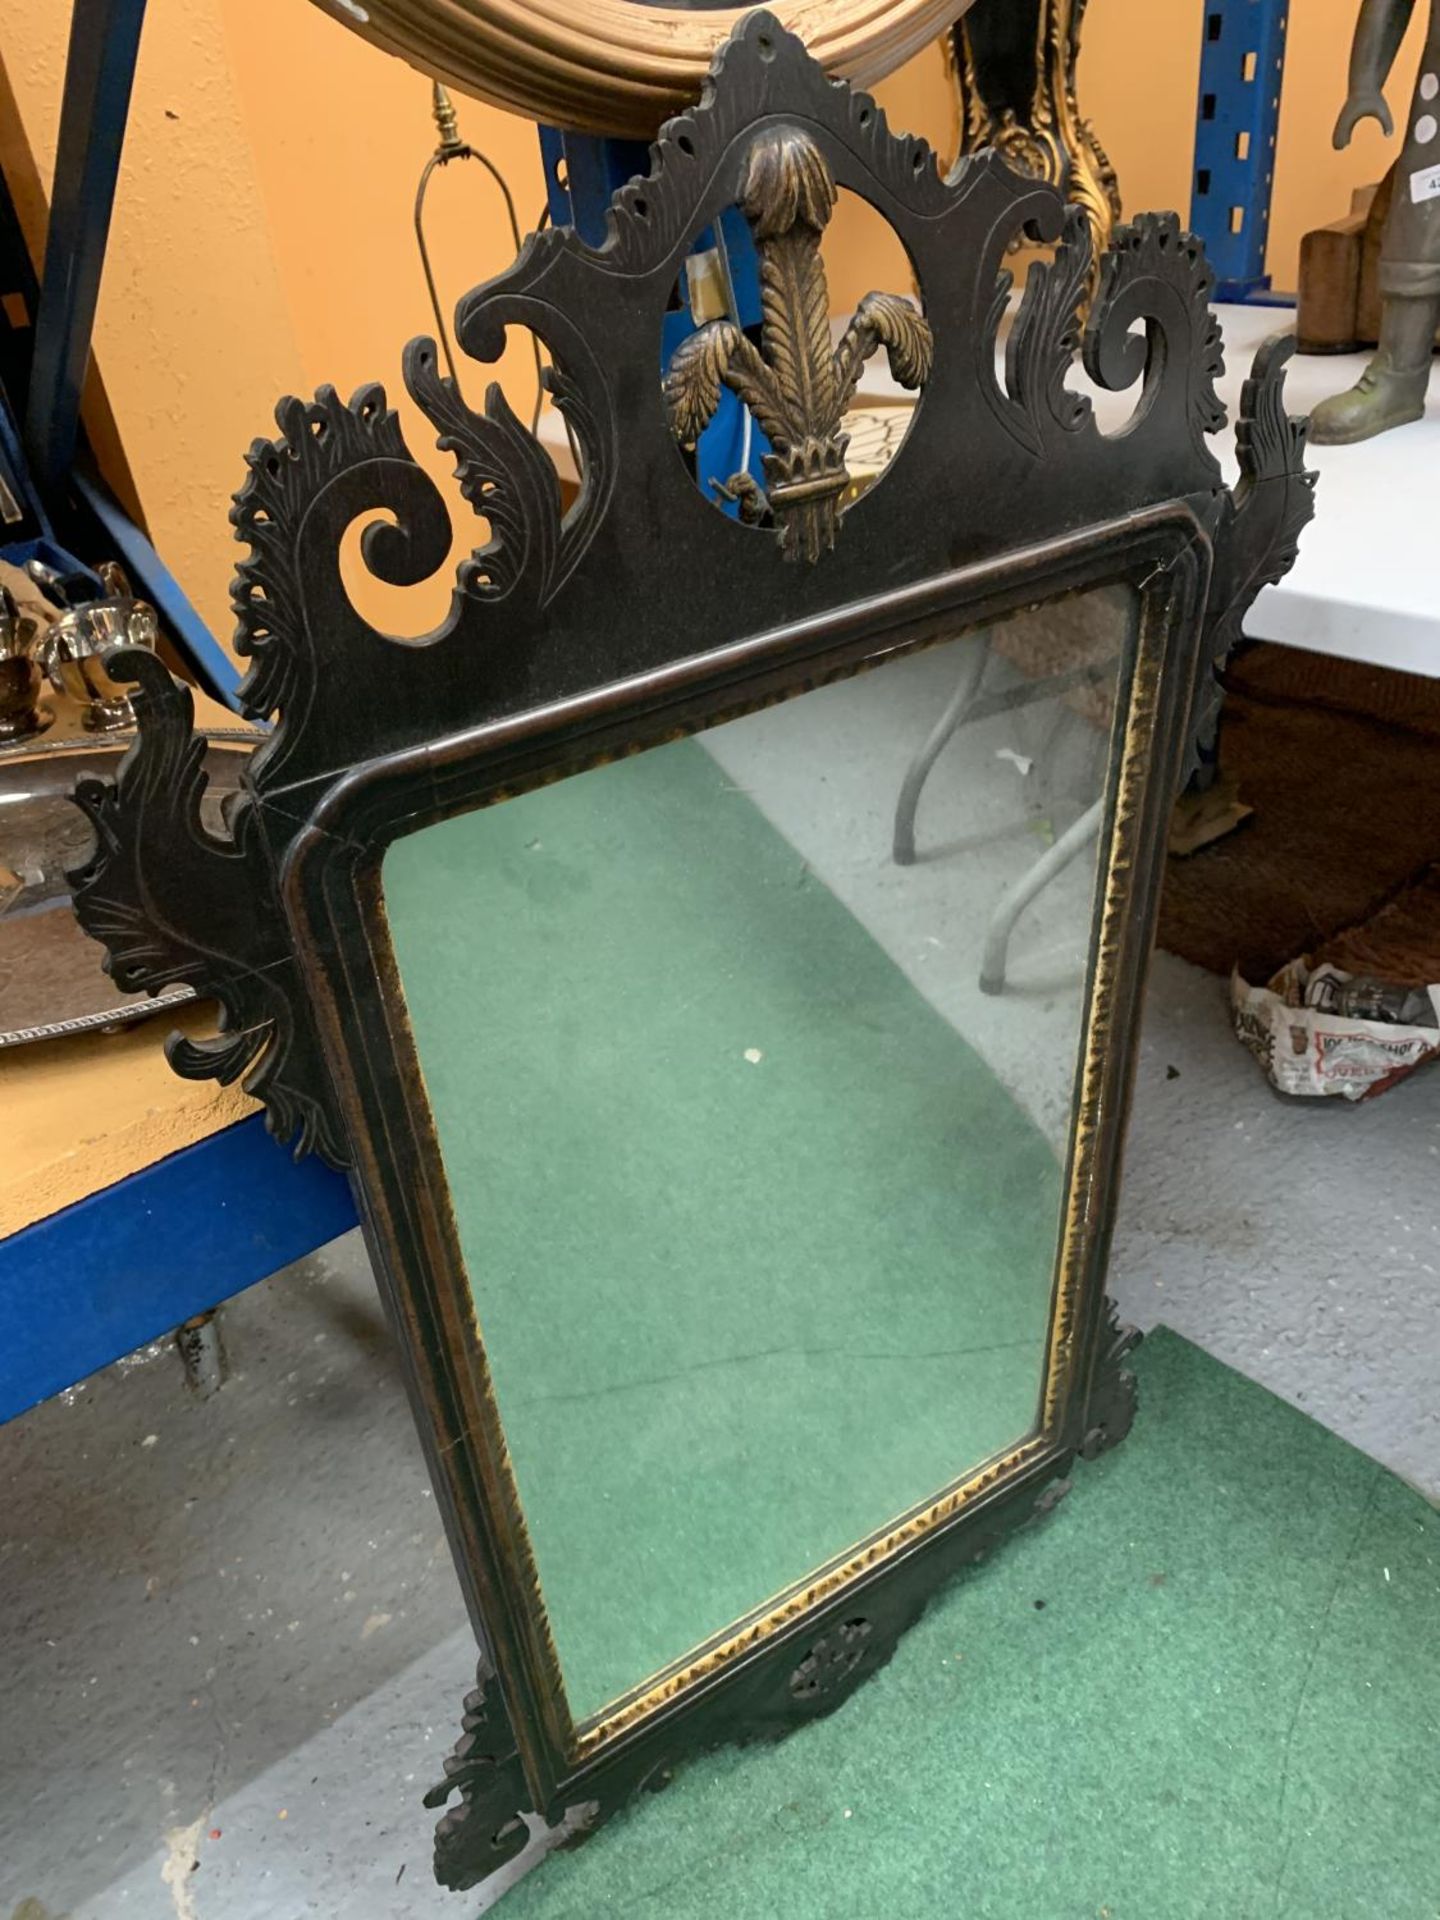 A LARGE MAHOGANY FRAMED MIRROR WITH CARVED DETAIL AND FLEUR DE LIS DECORATION